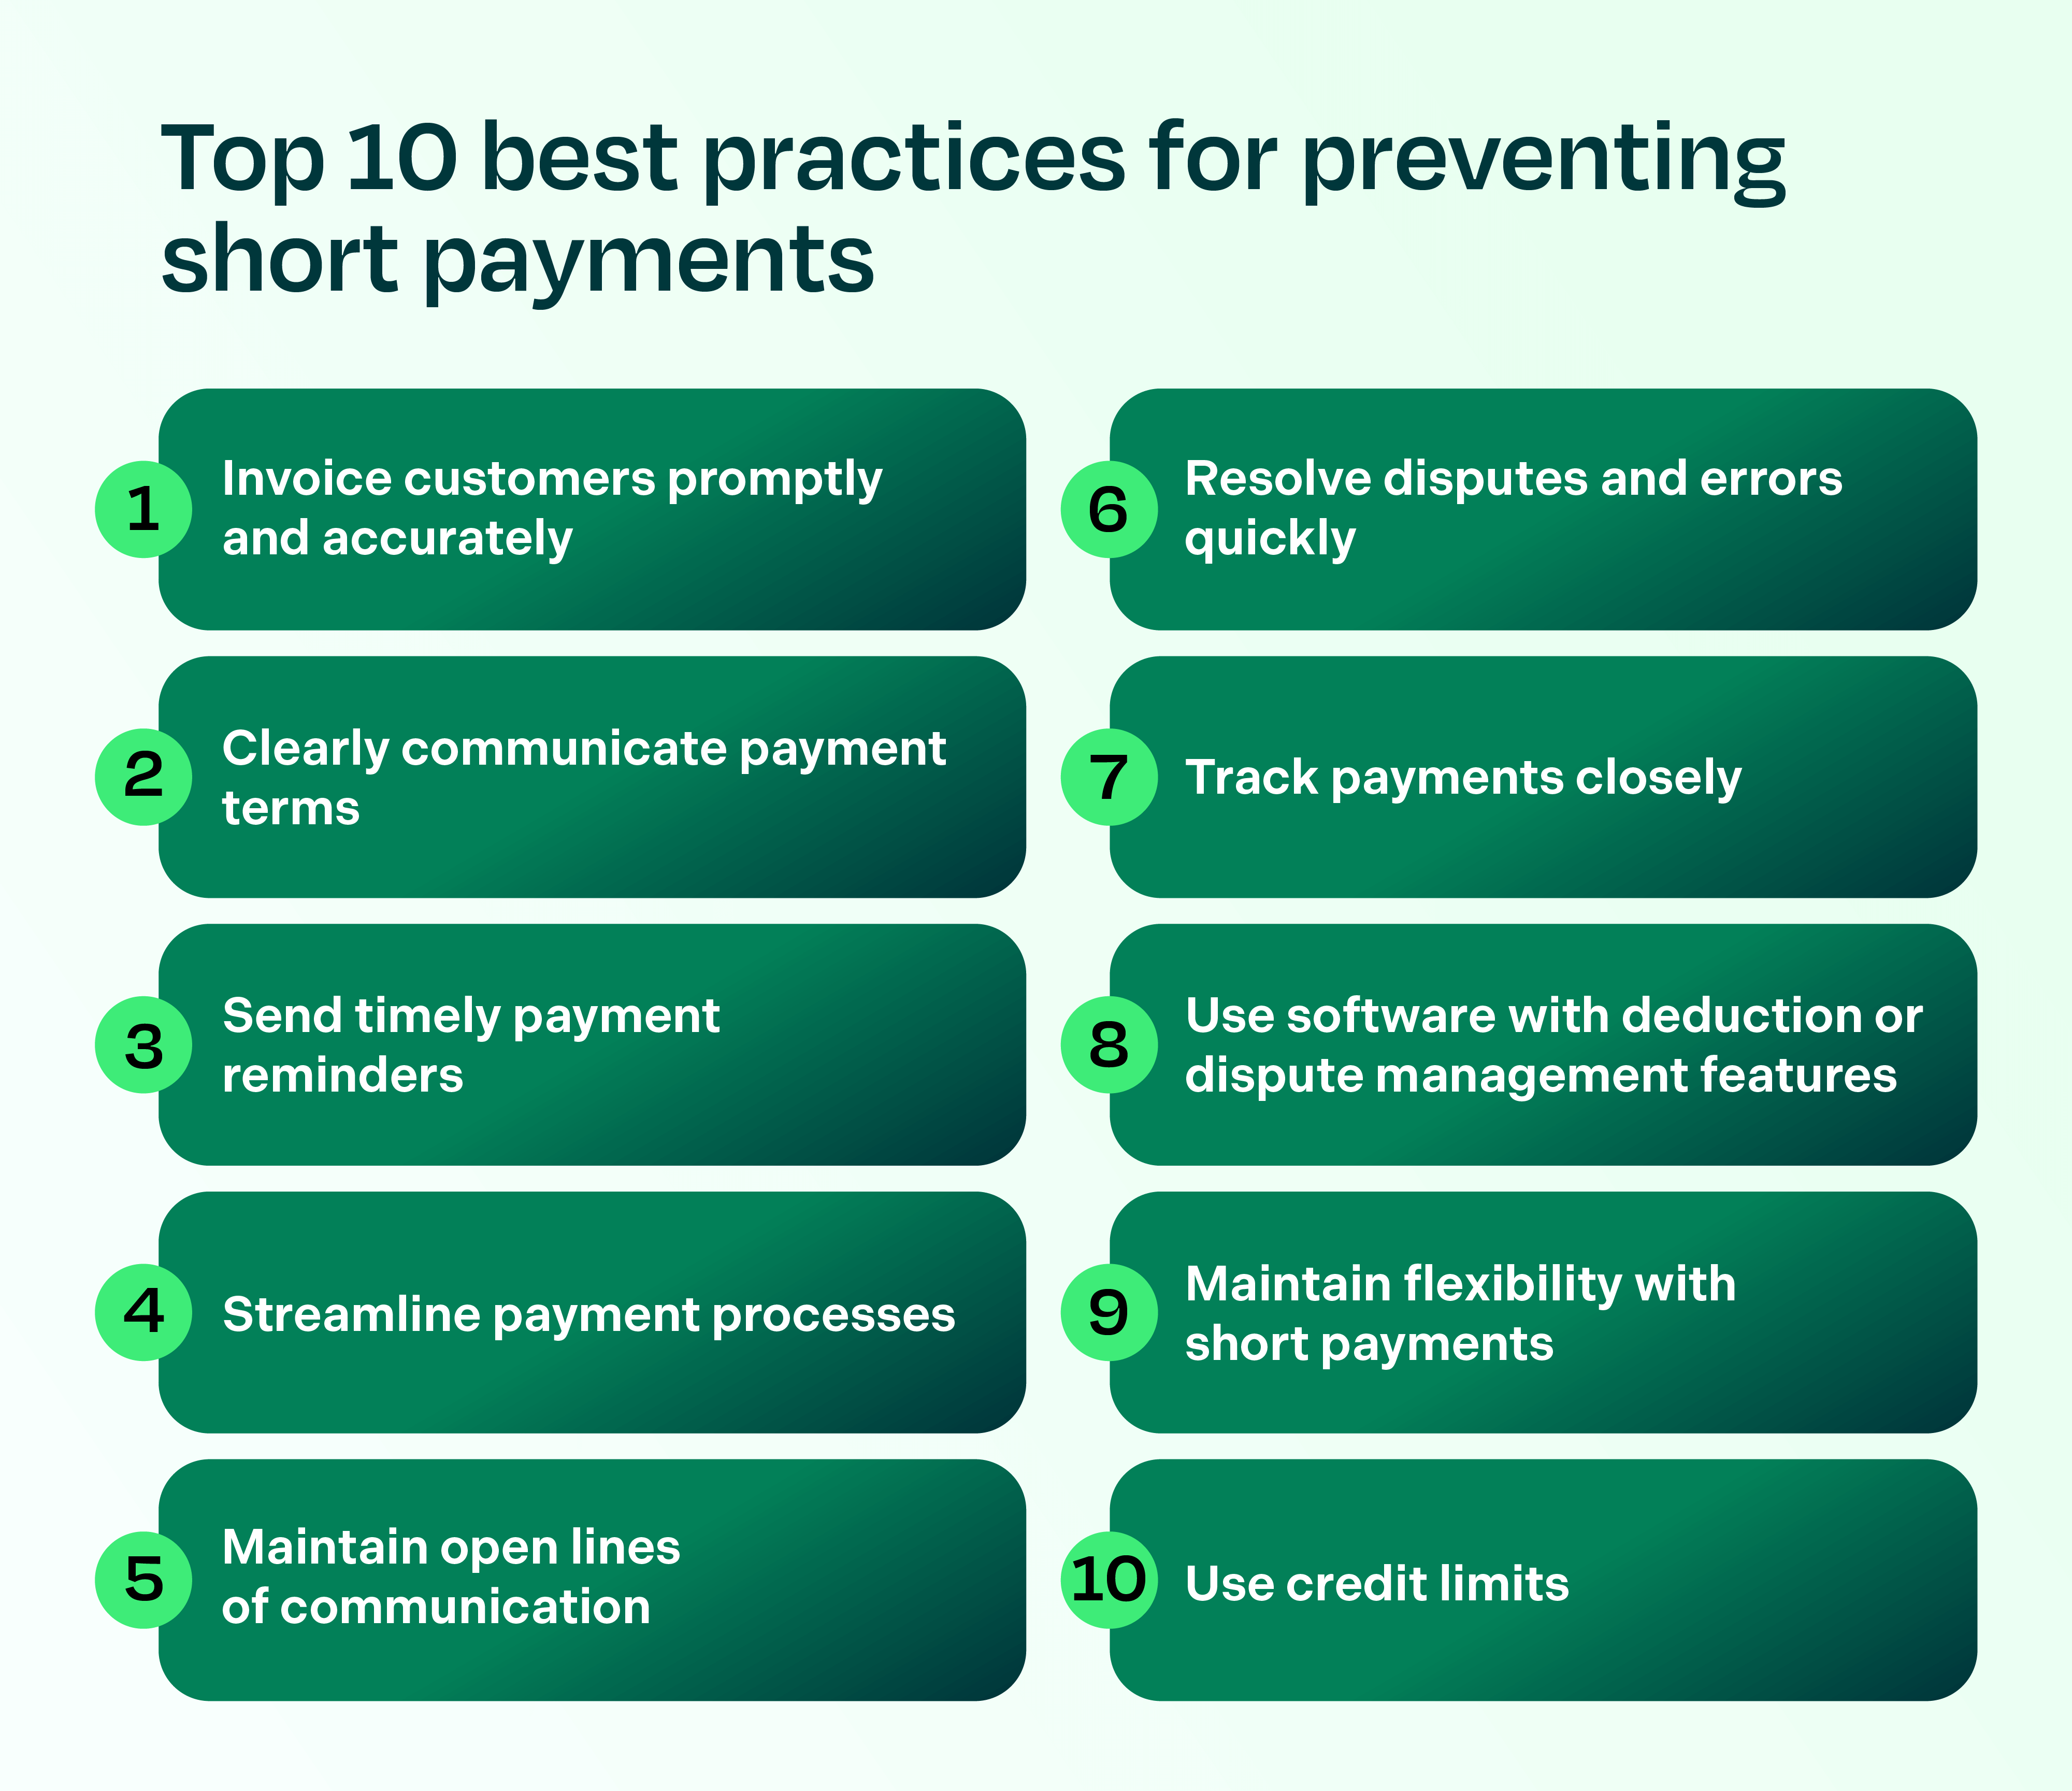 the top 10 best practices for preventing short payments